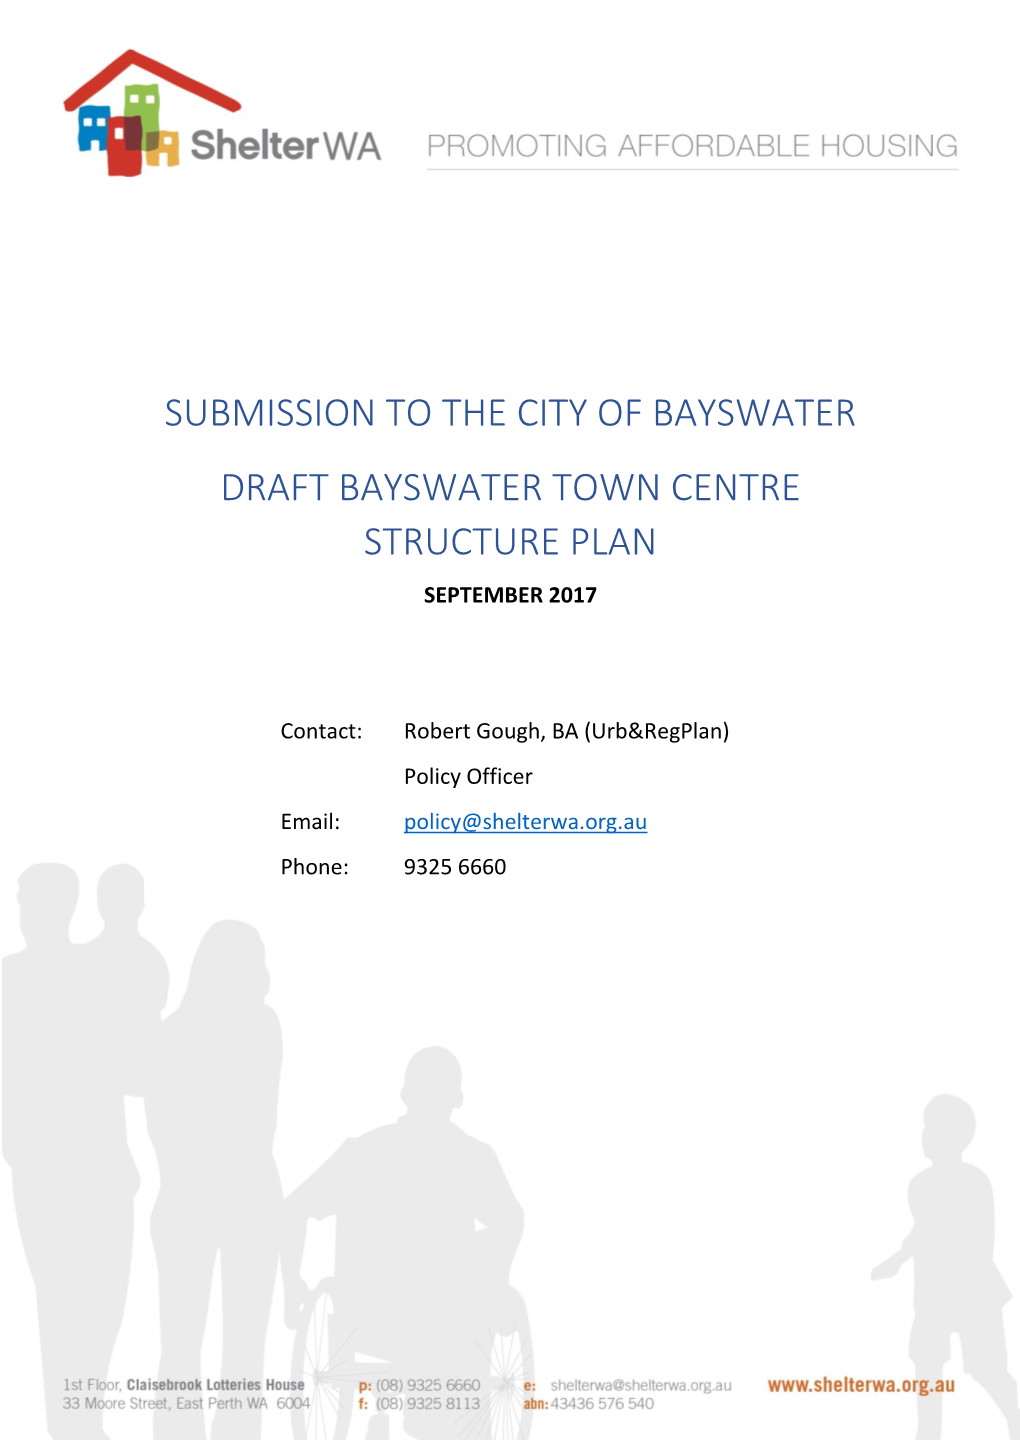 Submission to the City of Bayswater Draft Bayswater Town Centre Structure Plan September 2017